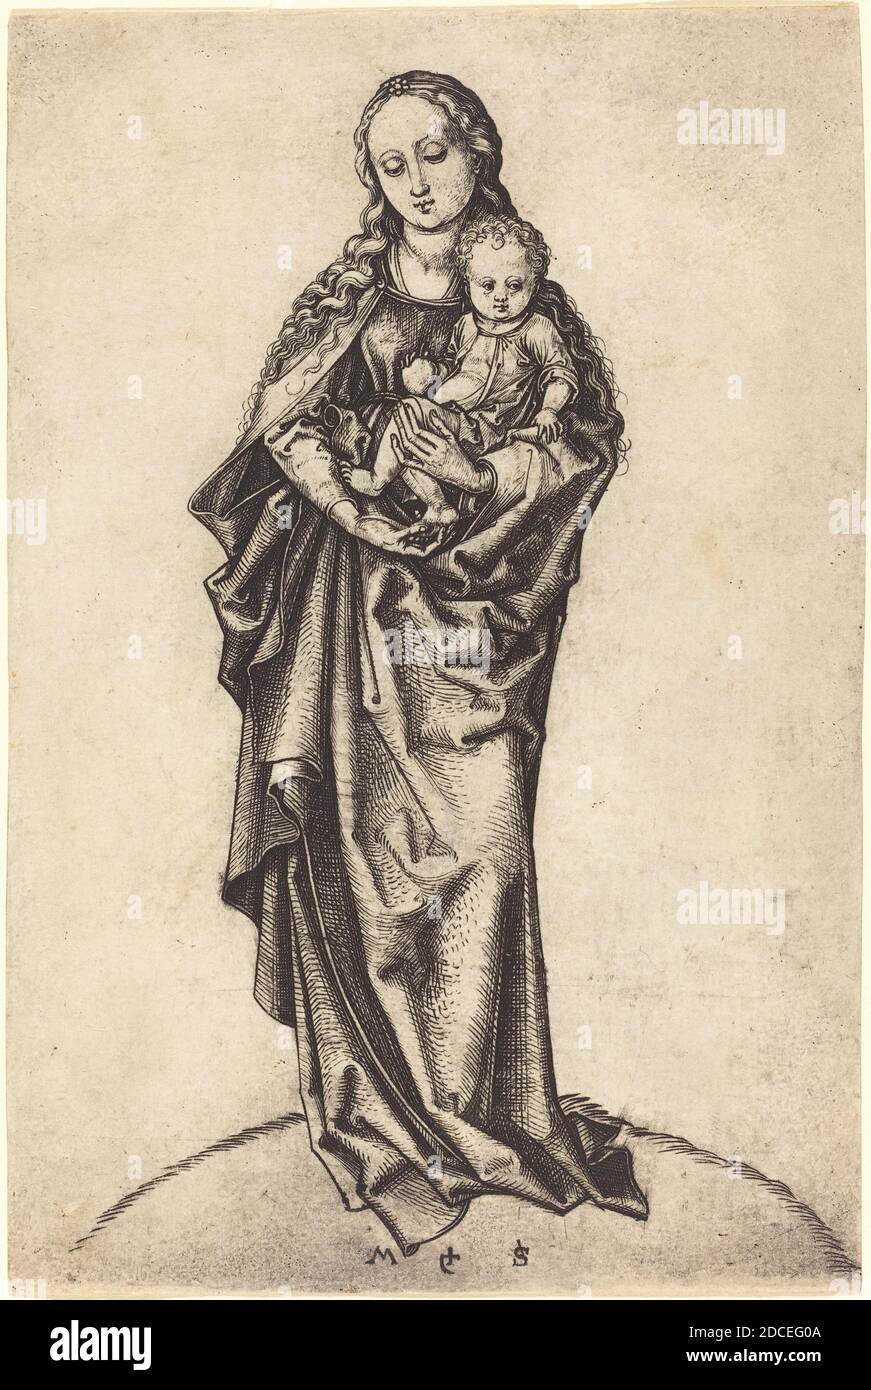 Martin Schongauer, (artist), German, c. 1450 - 1491, Virgin and Child with the Apple, c. 1470/1475, engraving Stock Photo